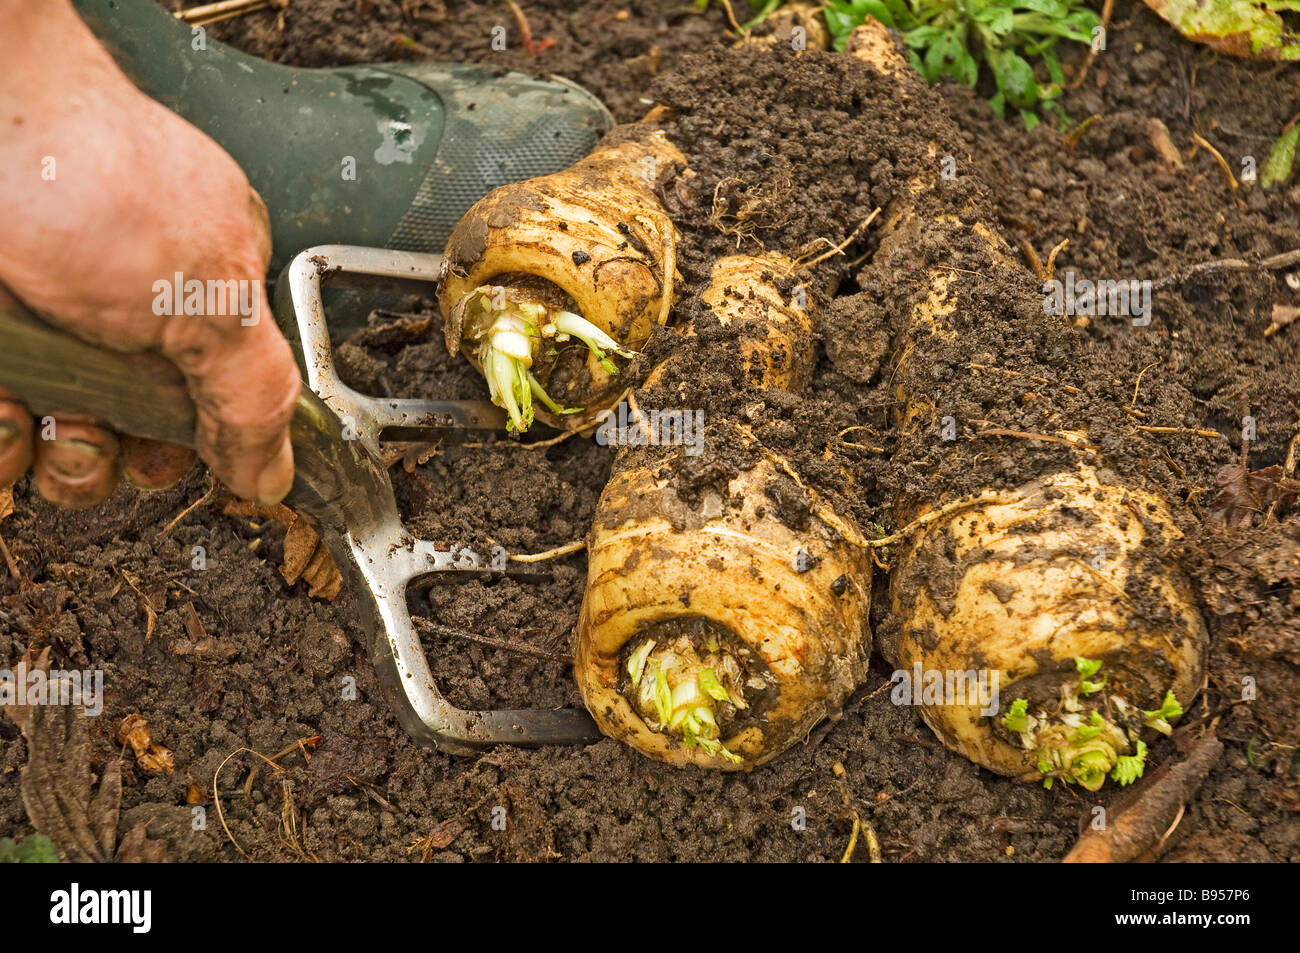 Close up of man gardener digging up parsnips root veg vegetables vegetables in a Allotment garden England UK United Kingdom GB Great Britain Stock Photo